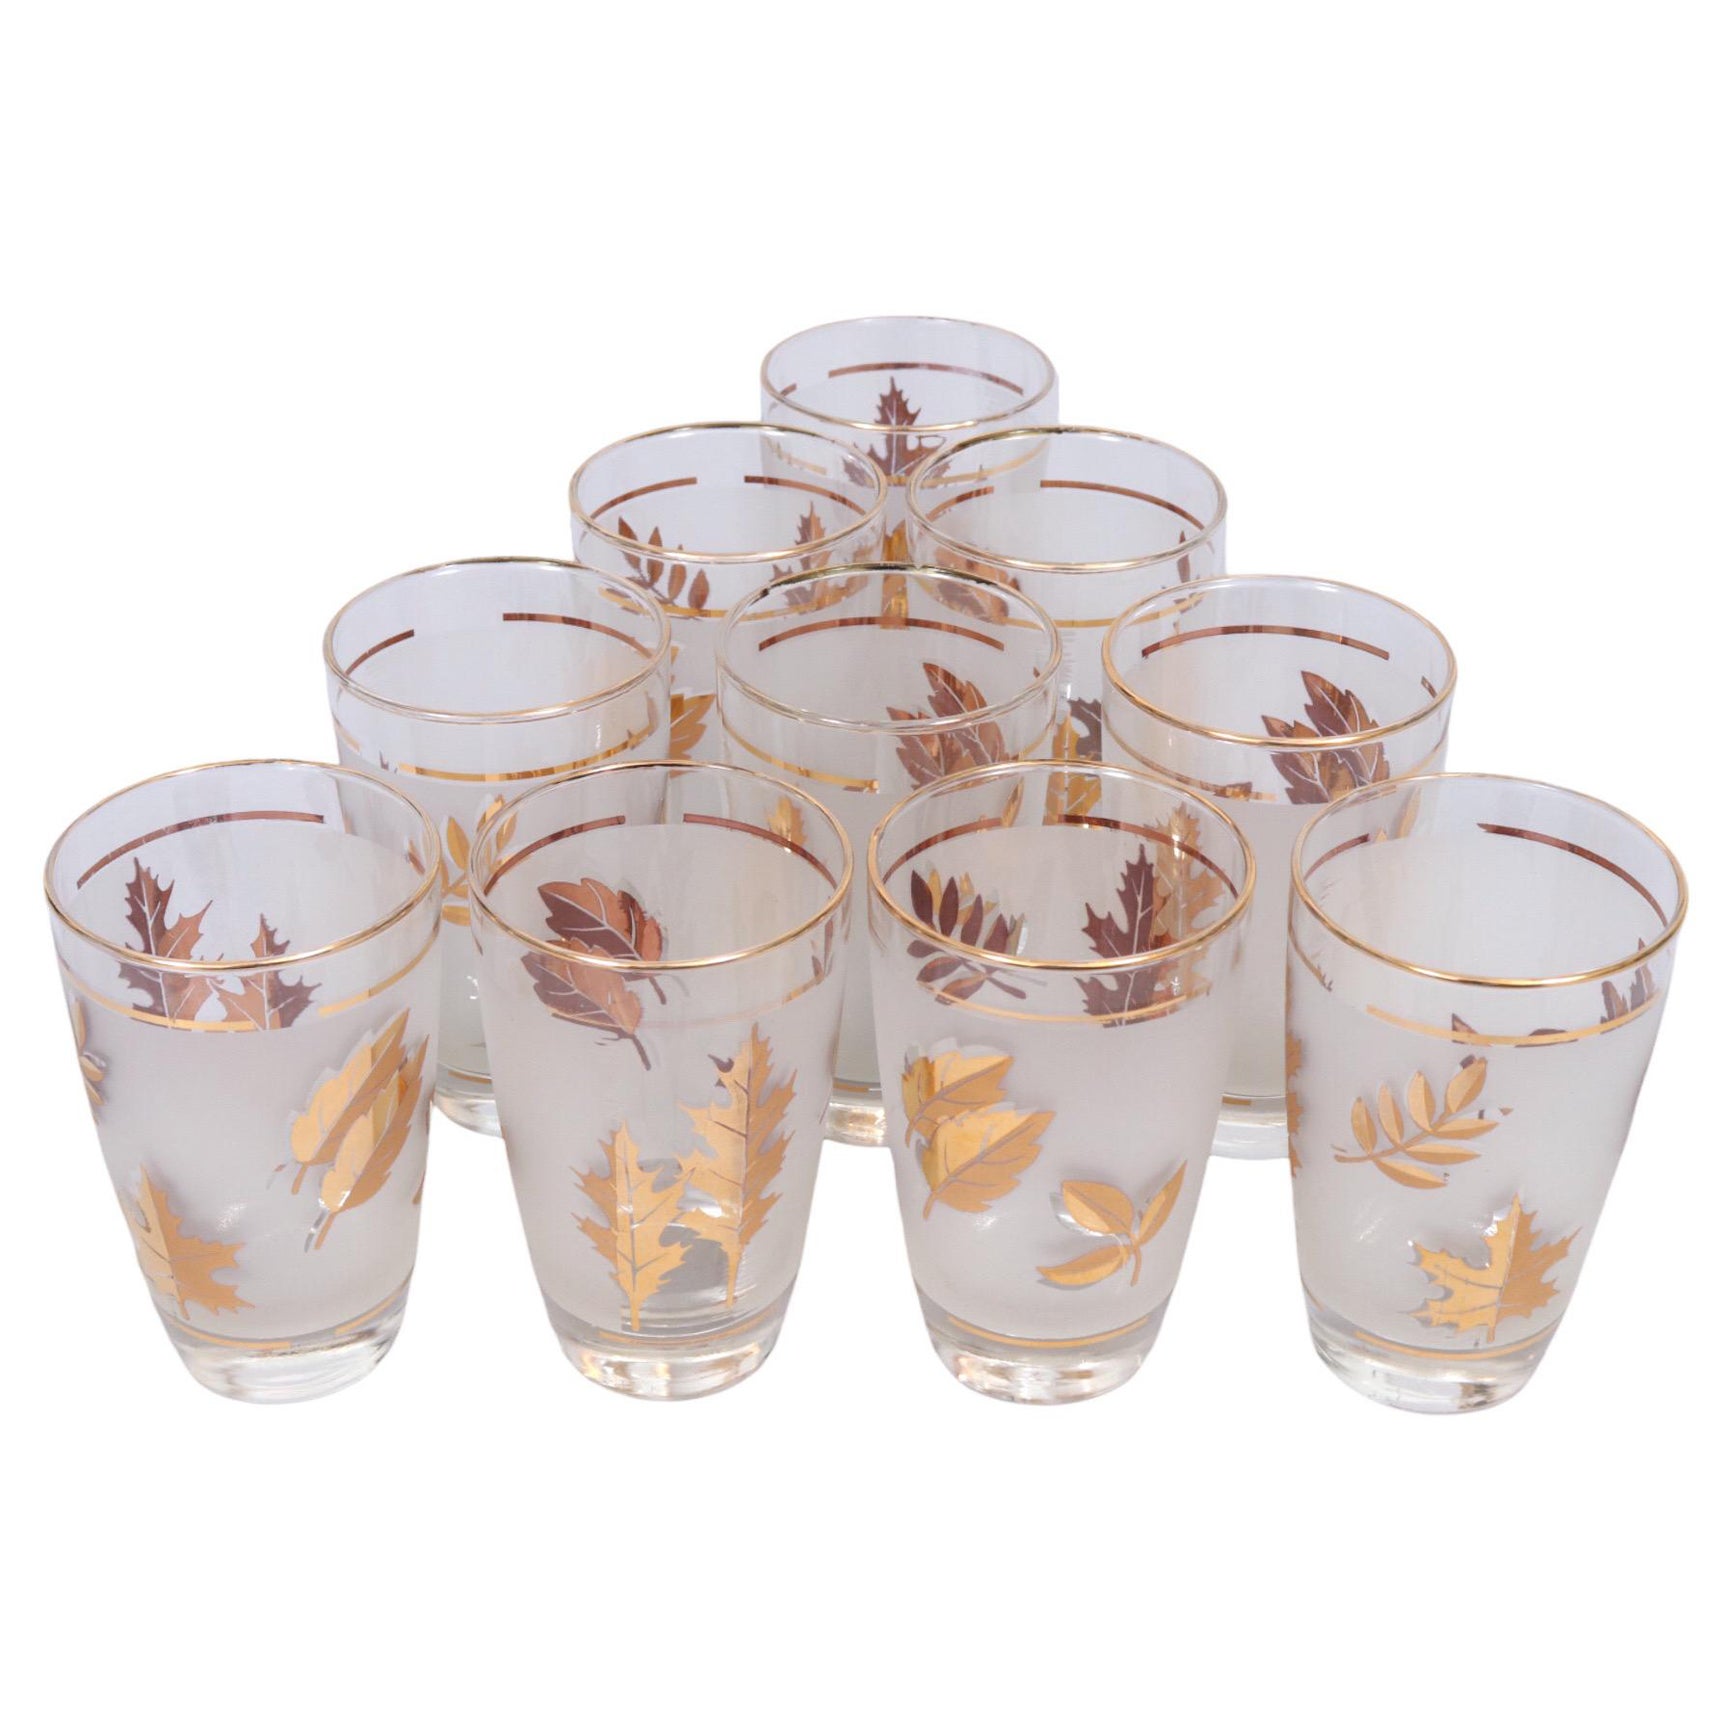 Golden Foliage Tumblers by Libbey Glass Company - Set of 10 For Sale